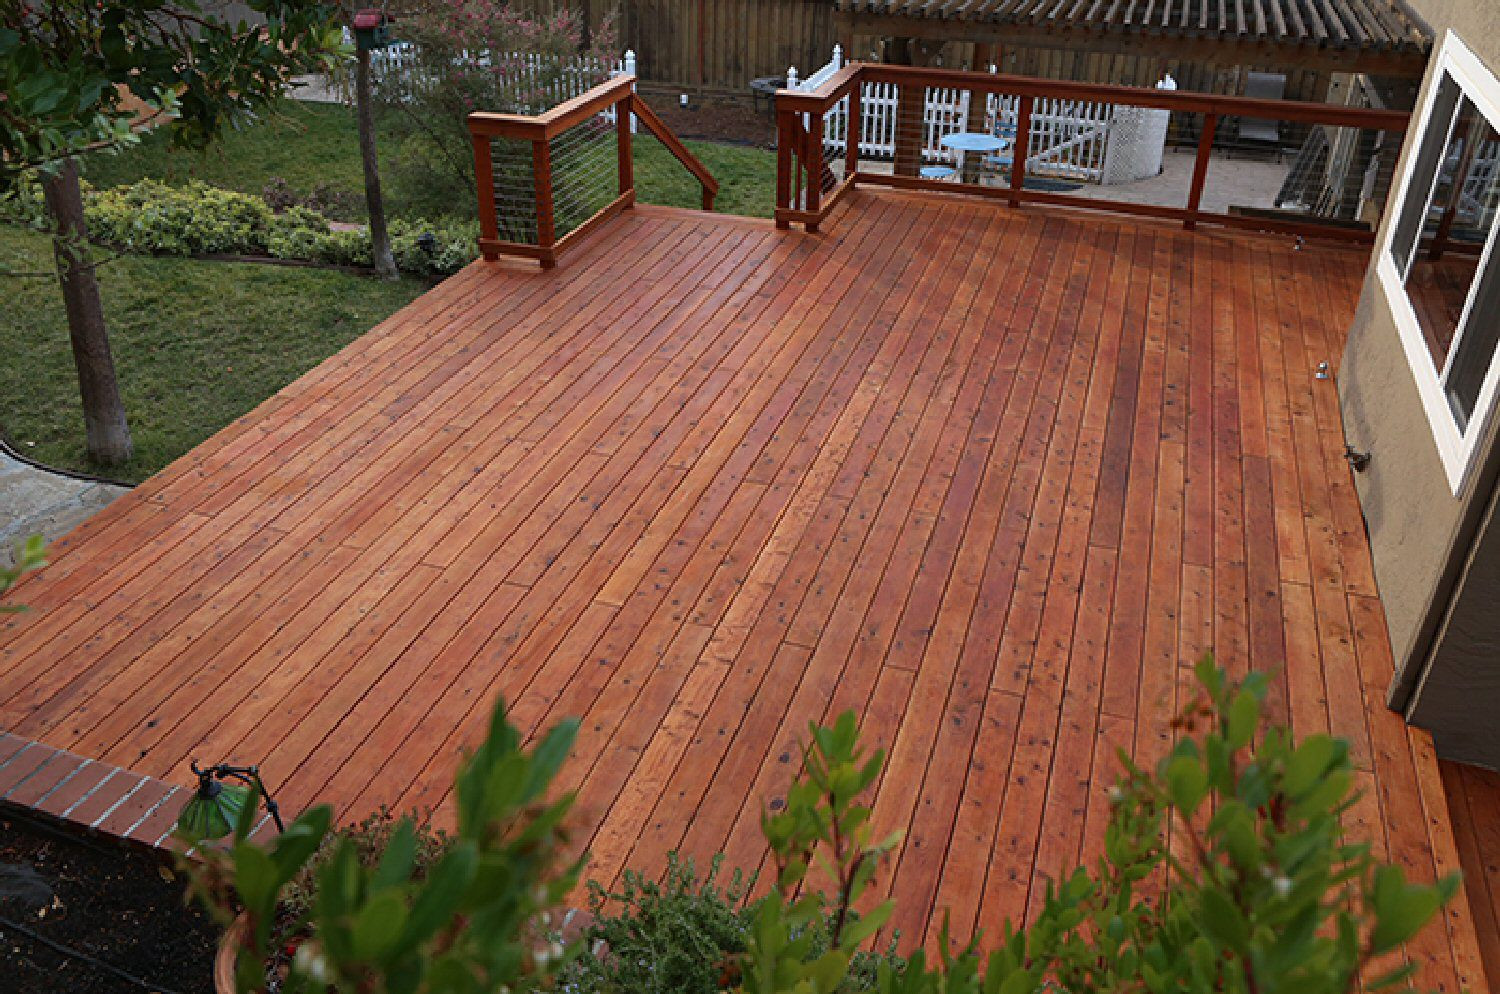 hardwood floor repair south jersey of the best woods for decks and porches pertaining to redwood deck 4q7b7981 web crop 59853a4e054ad90011d5f0fc